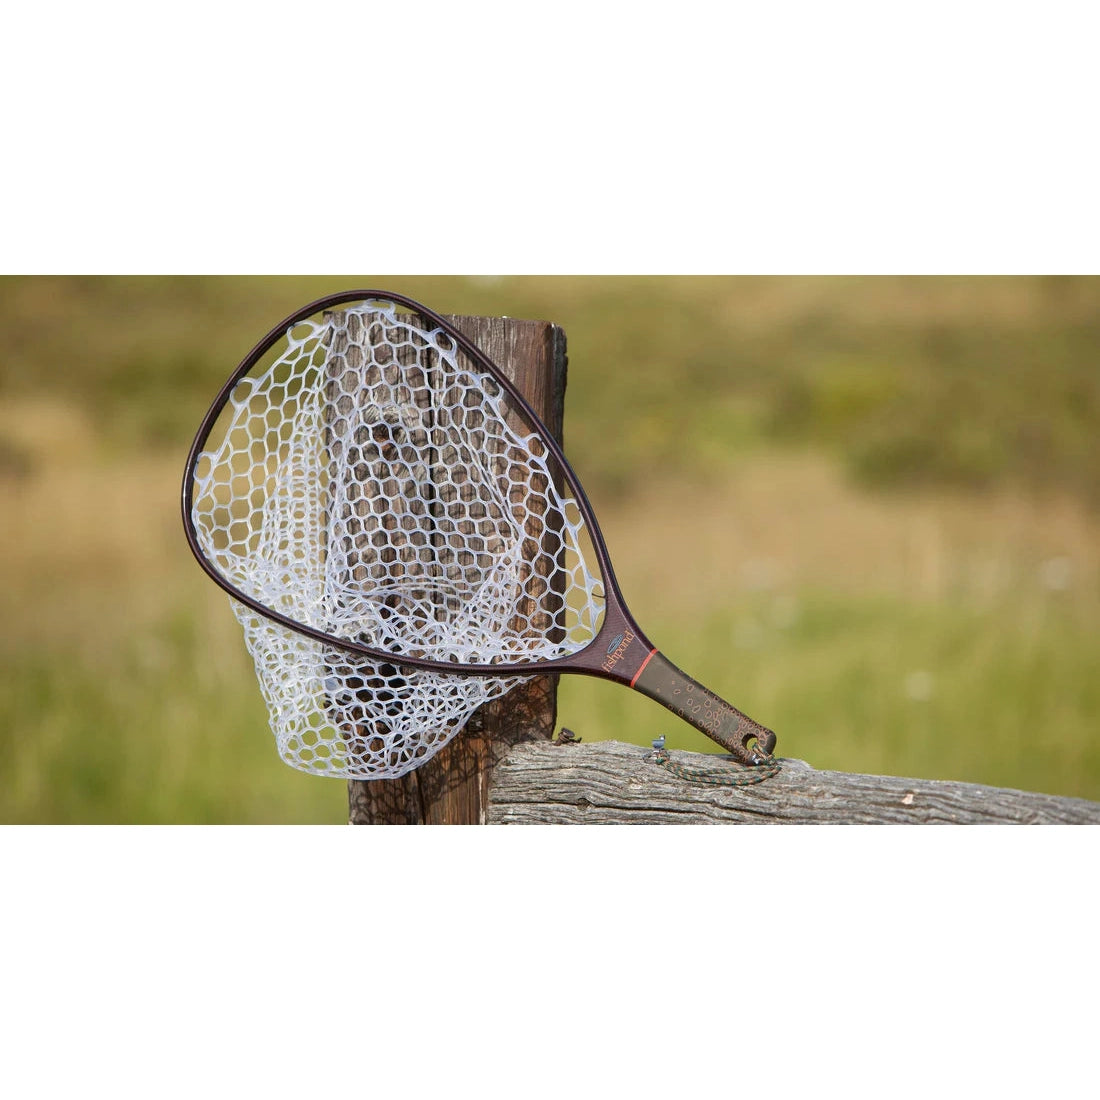 Fishpond / Nomad Hand Net Tailwater